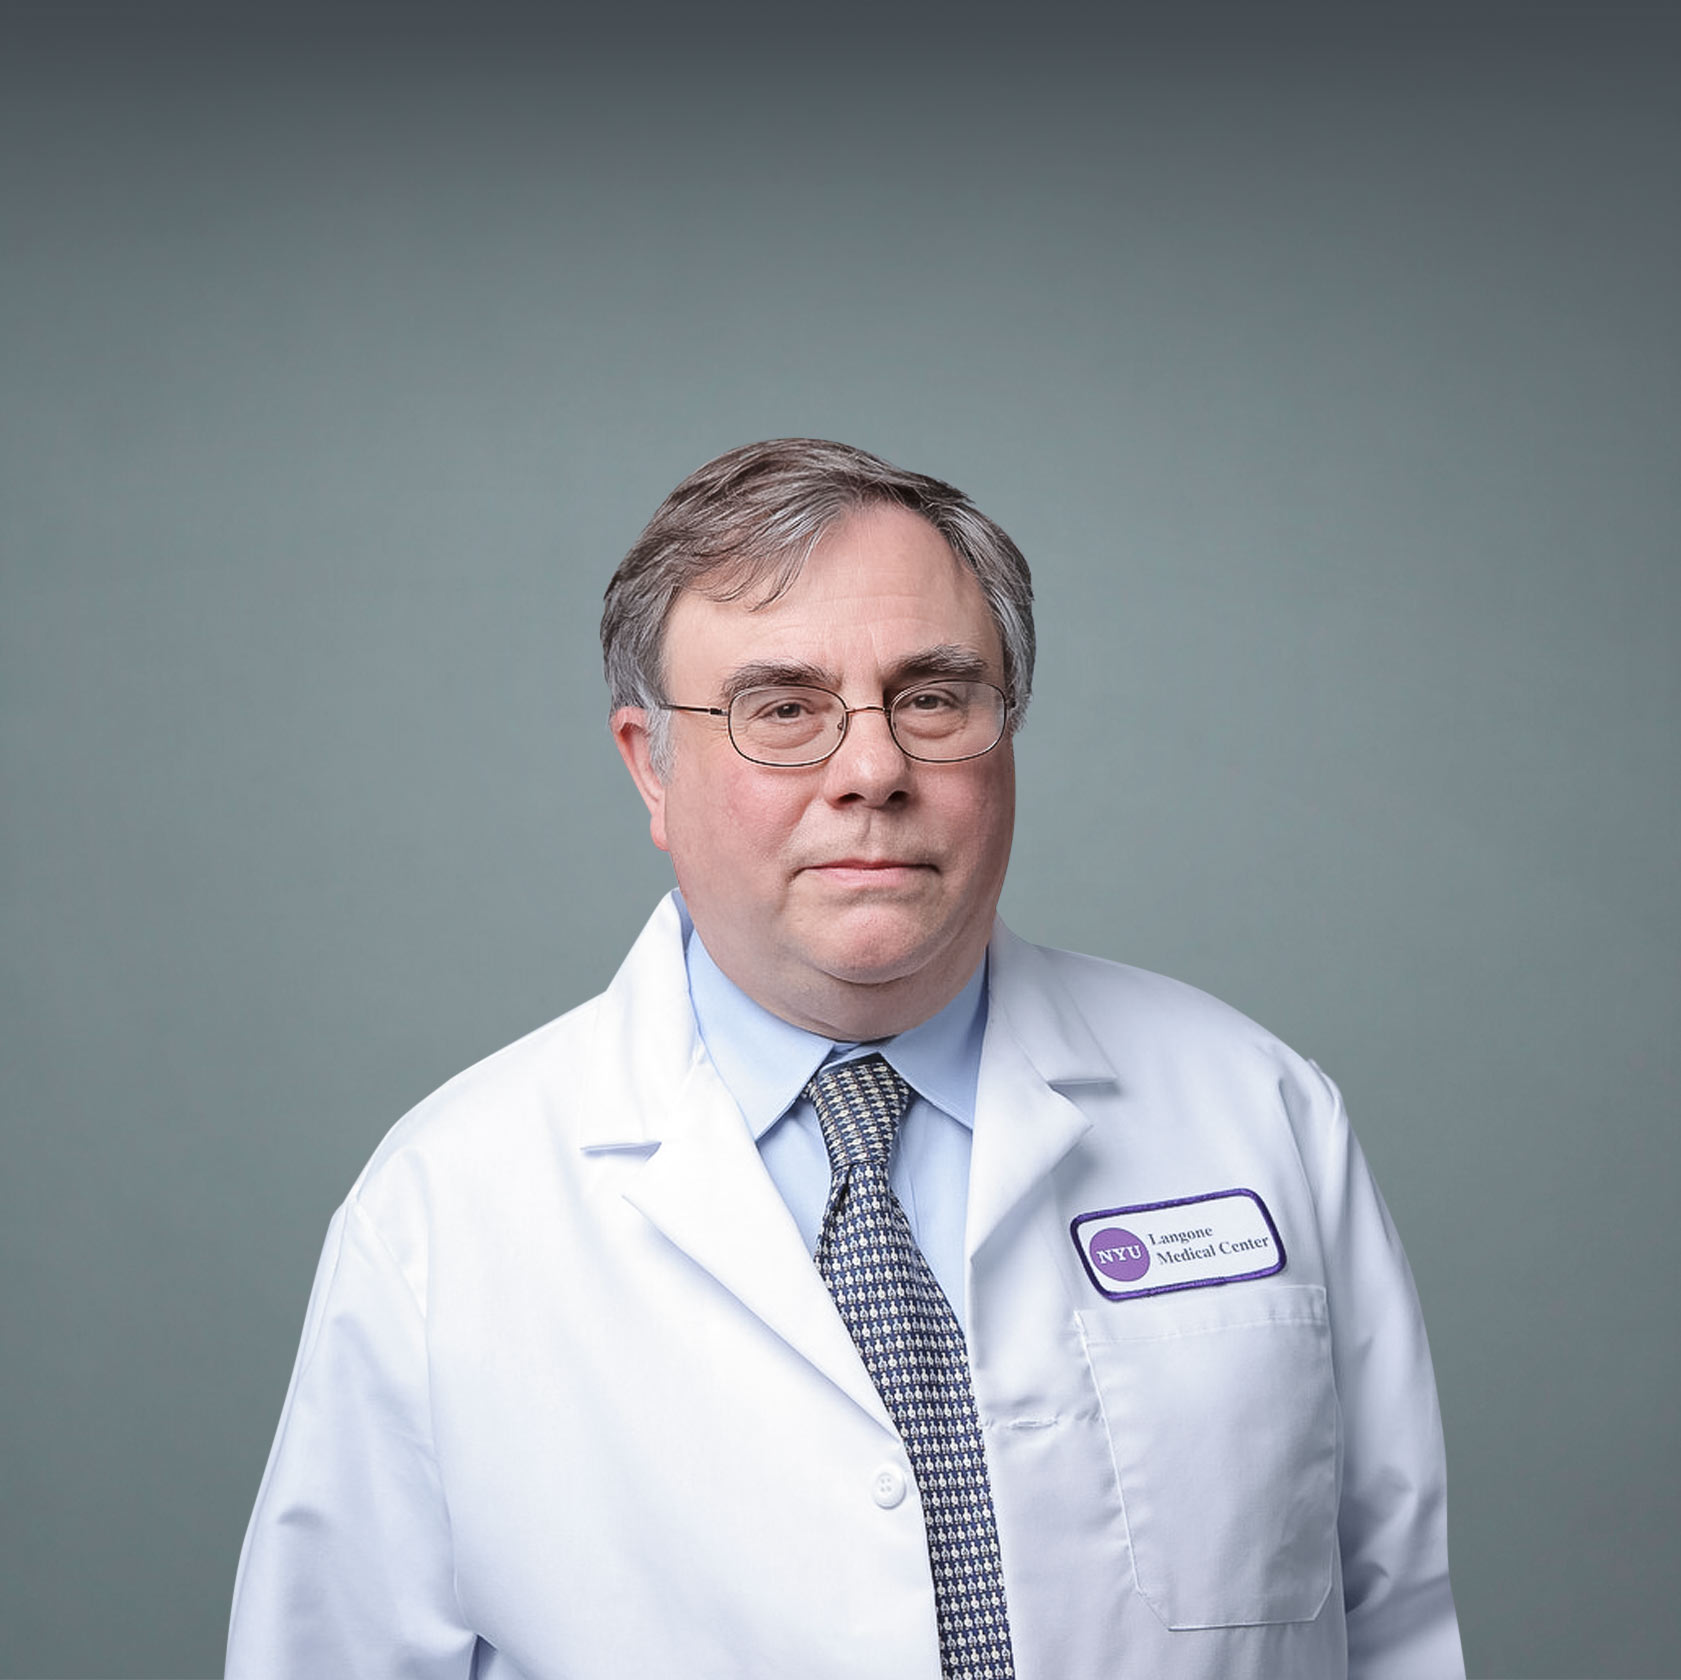 Hematologist Dr. Kenneth Hymes